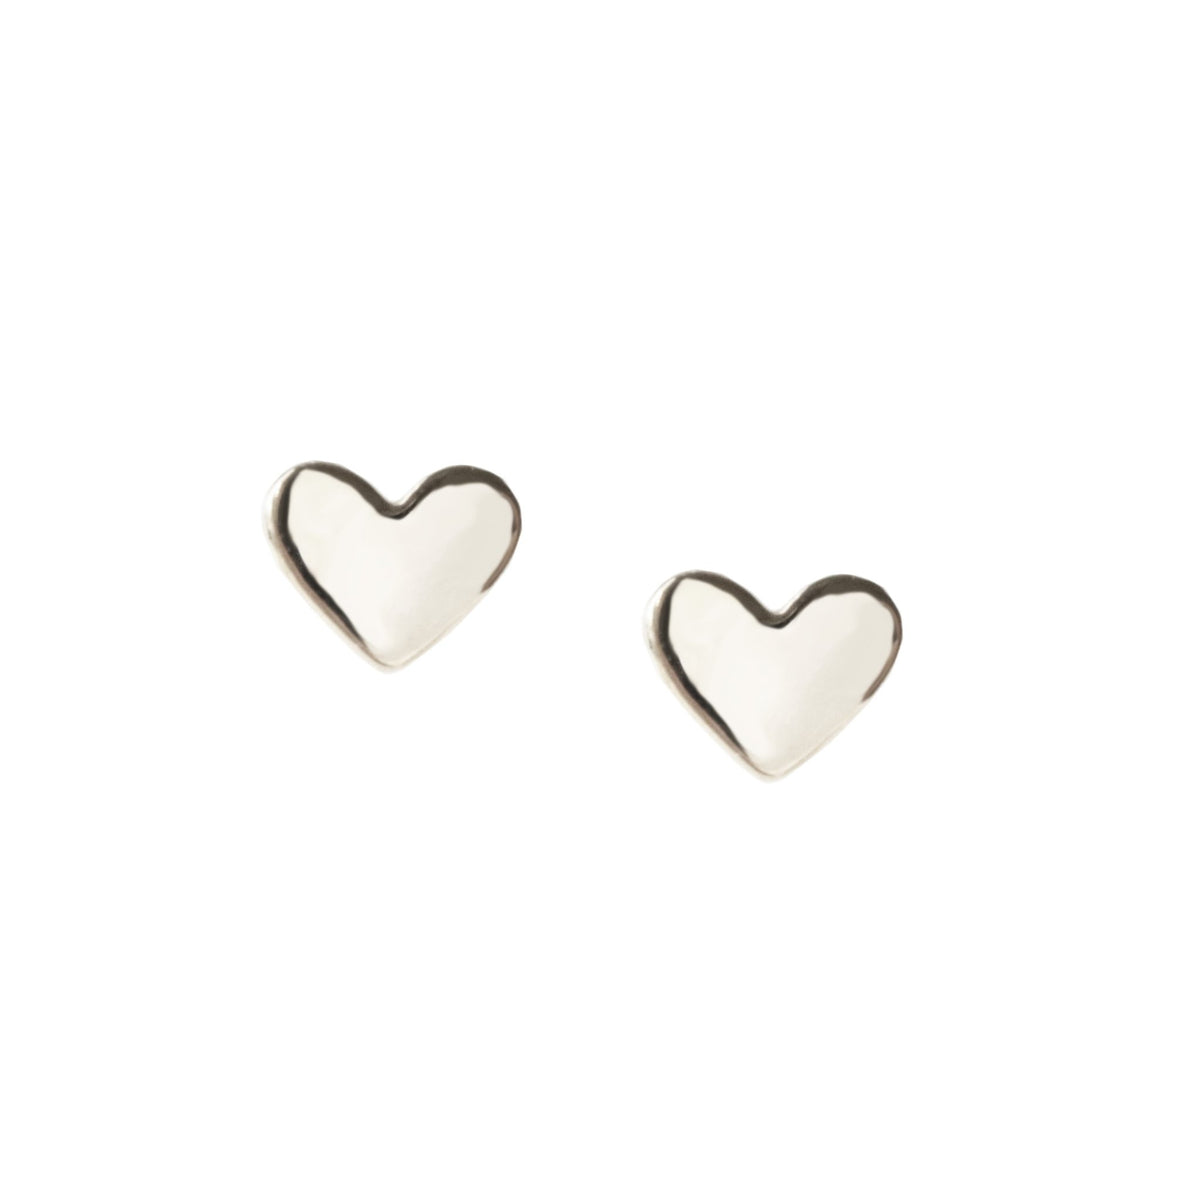 TINY POISE HEART STUDS - SILVER - SO PRETTY CARA COTTER